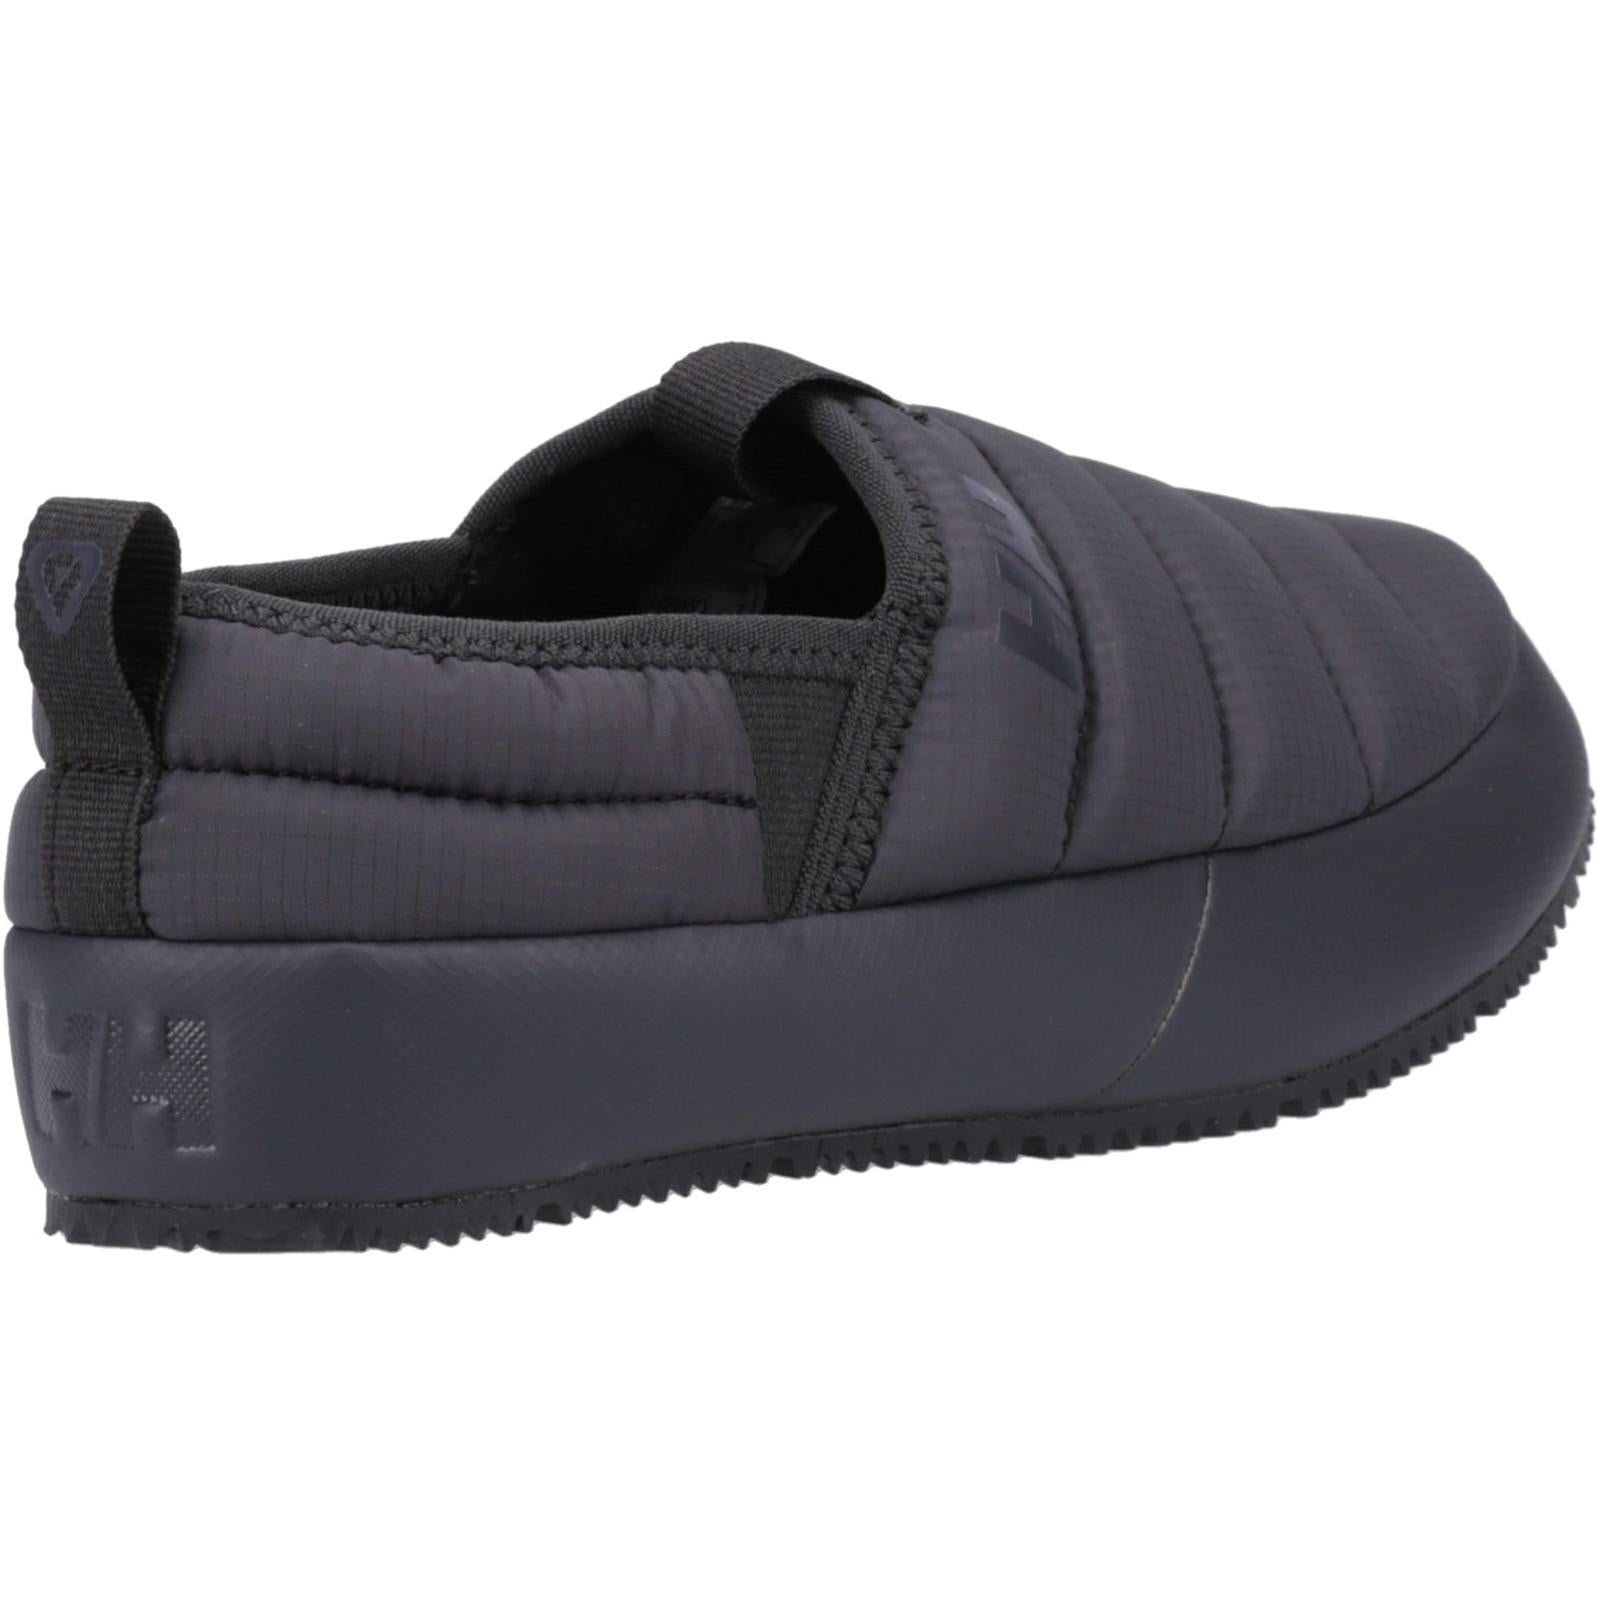 Helly Hansen Cabin Loafer Shoes